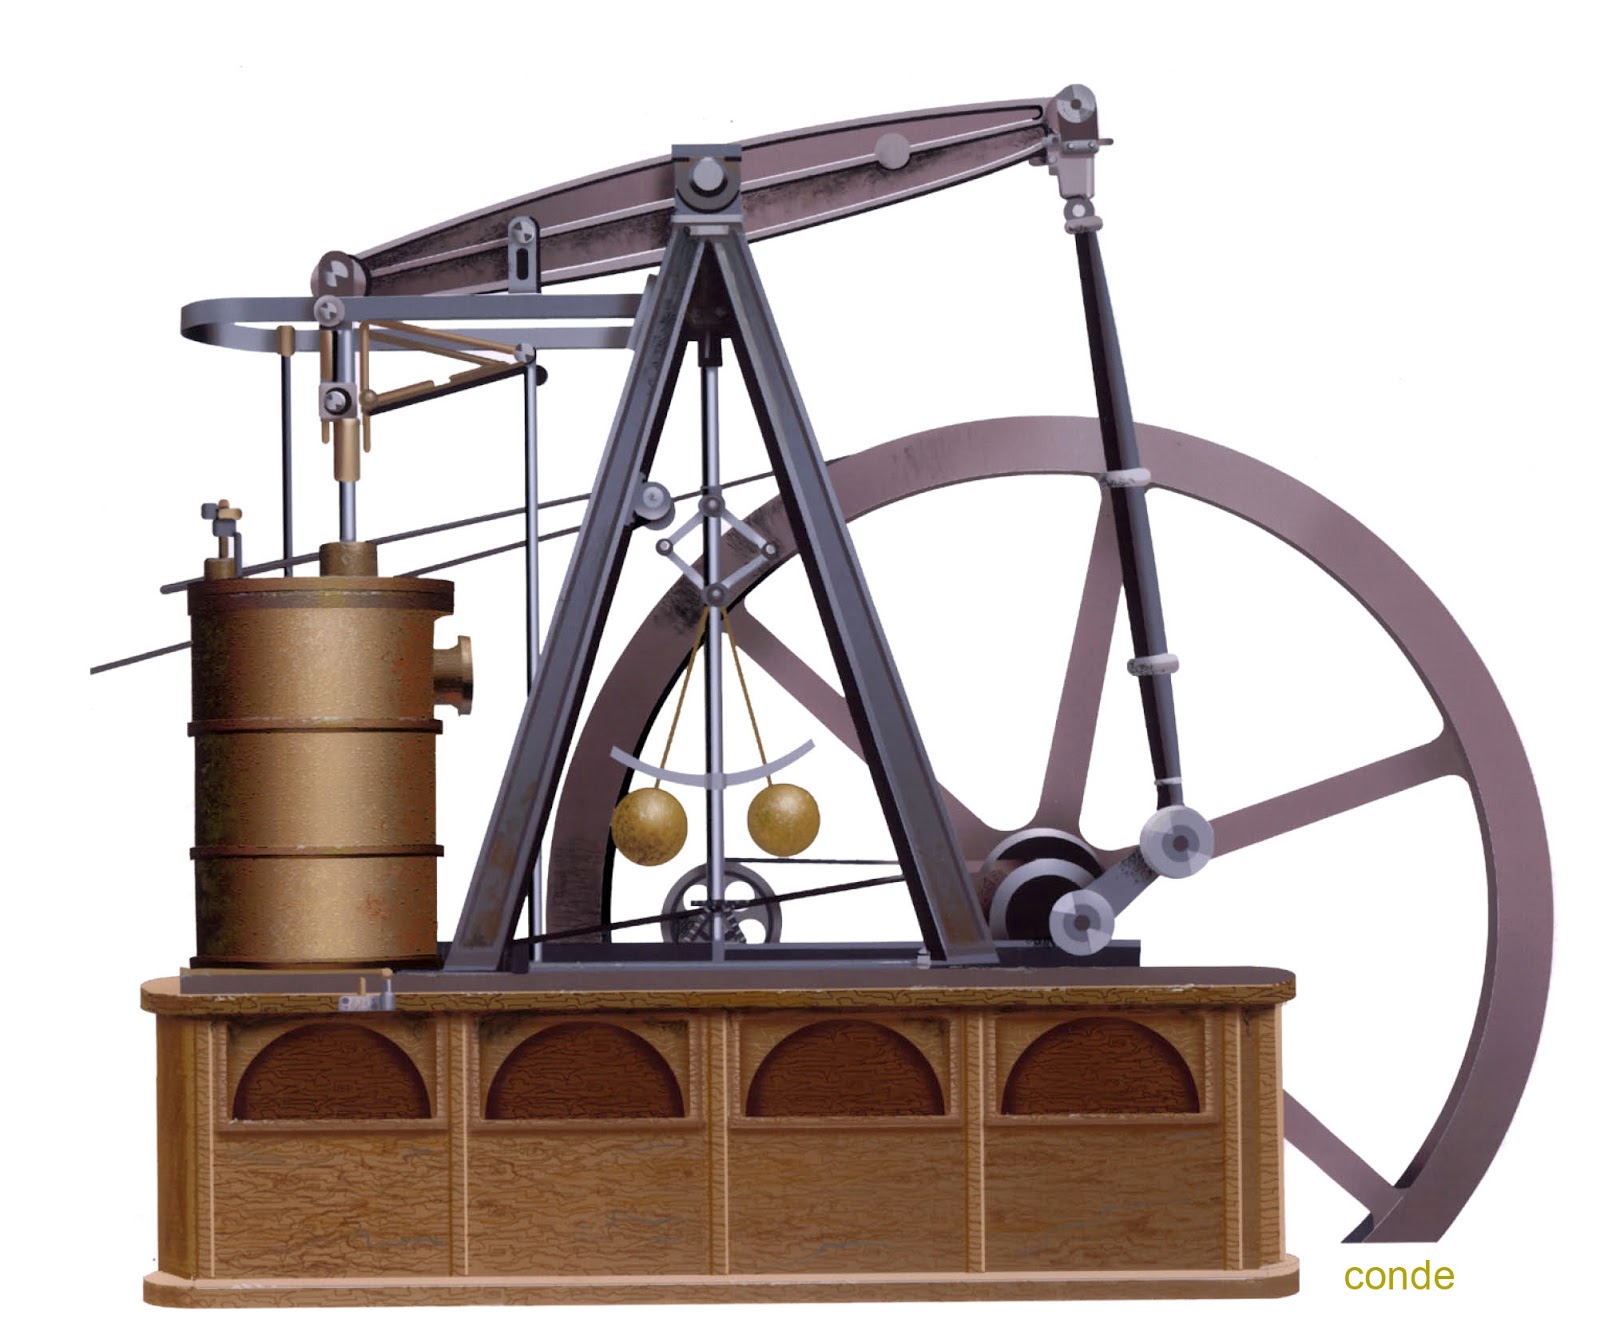 James watt and the invention of the steam engine фото 60